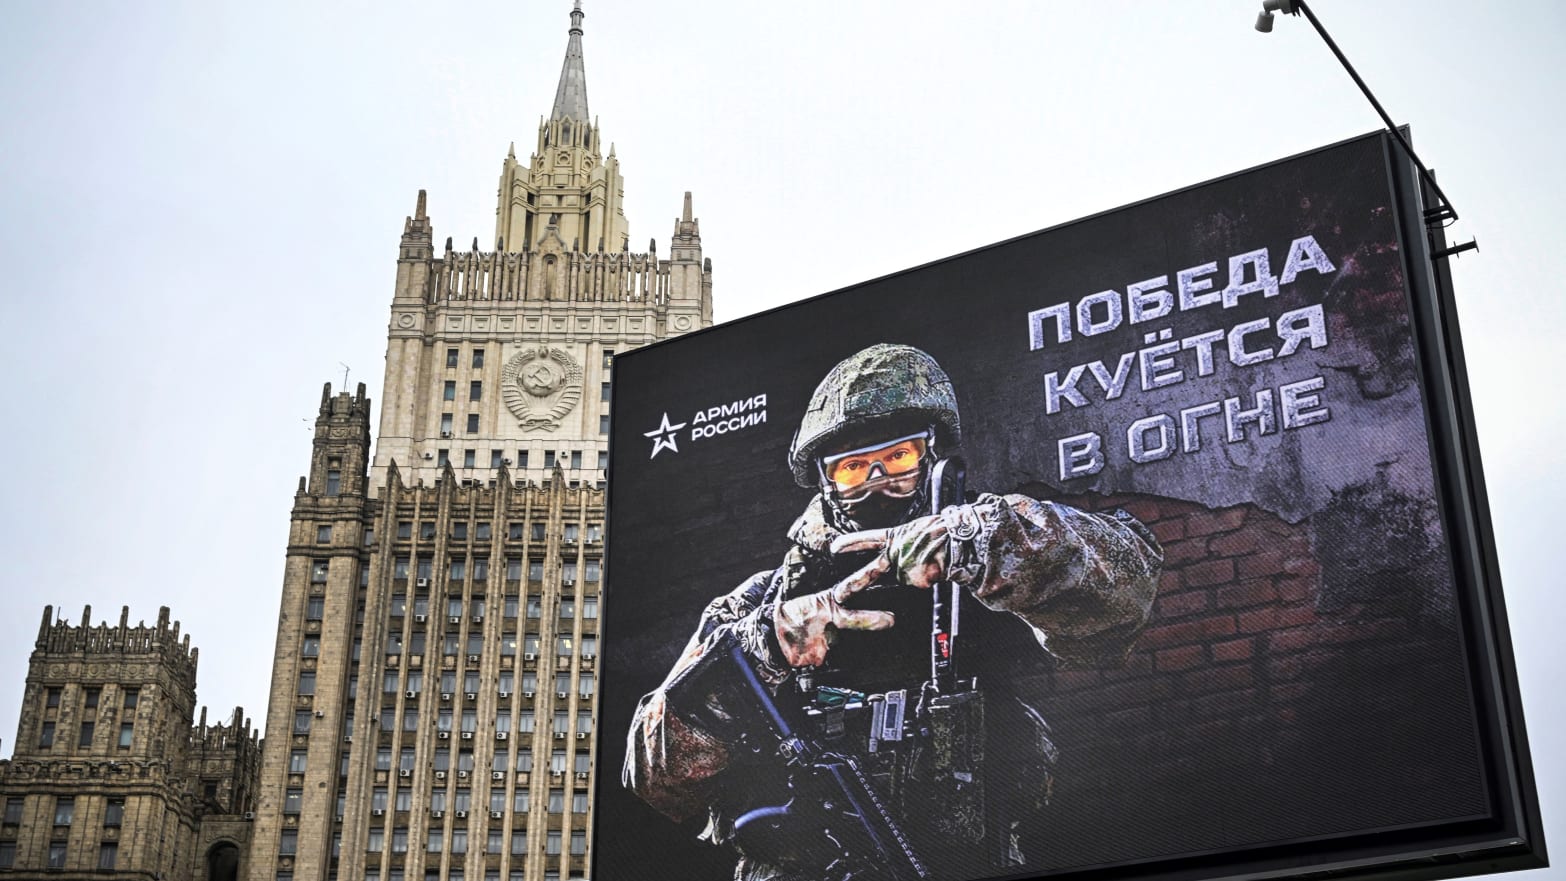 Russian Foreign Ministry building is seen behind a social advertisement billboard showing Z letters - a tactical insignia of Russian troops in Ukraine